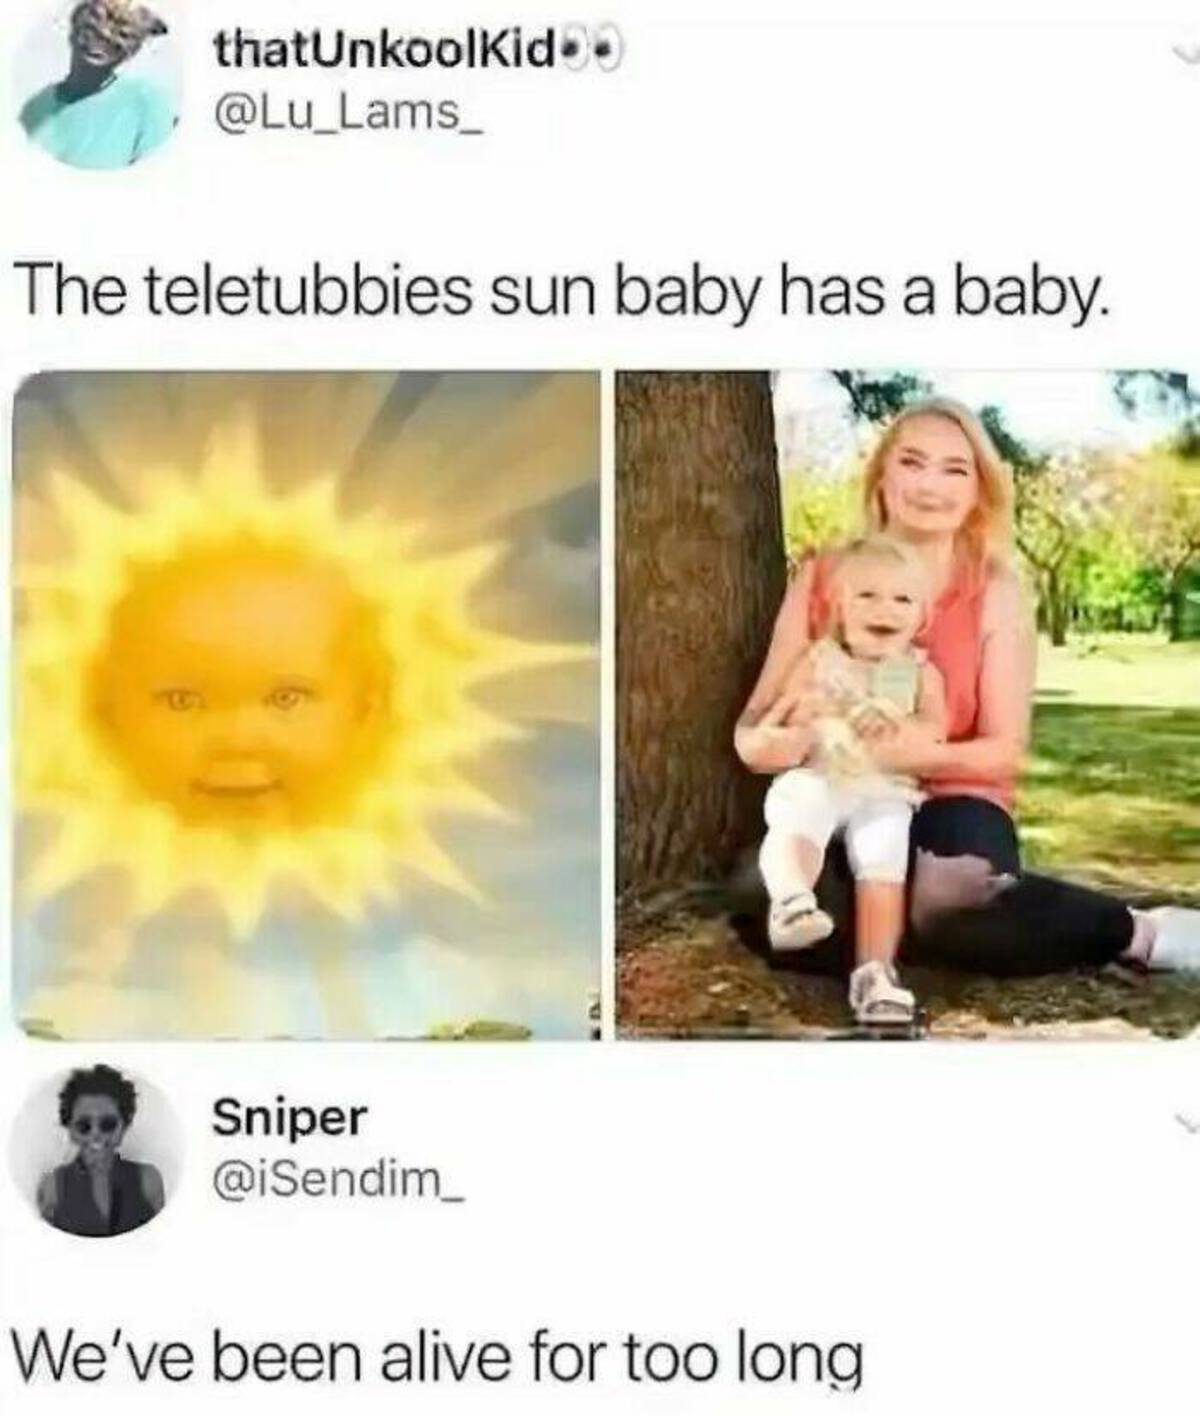 teletubbies sun baby has a baby meme - thatUnkoolKid00 The teletubbies sun baby has a baby. Sniper We've been alive for too long